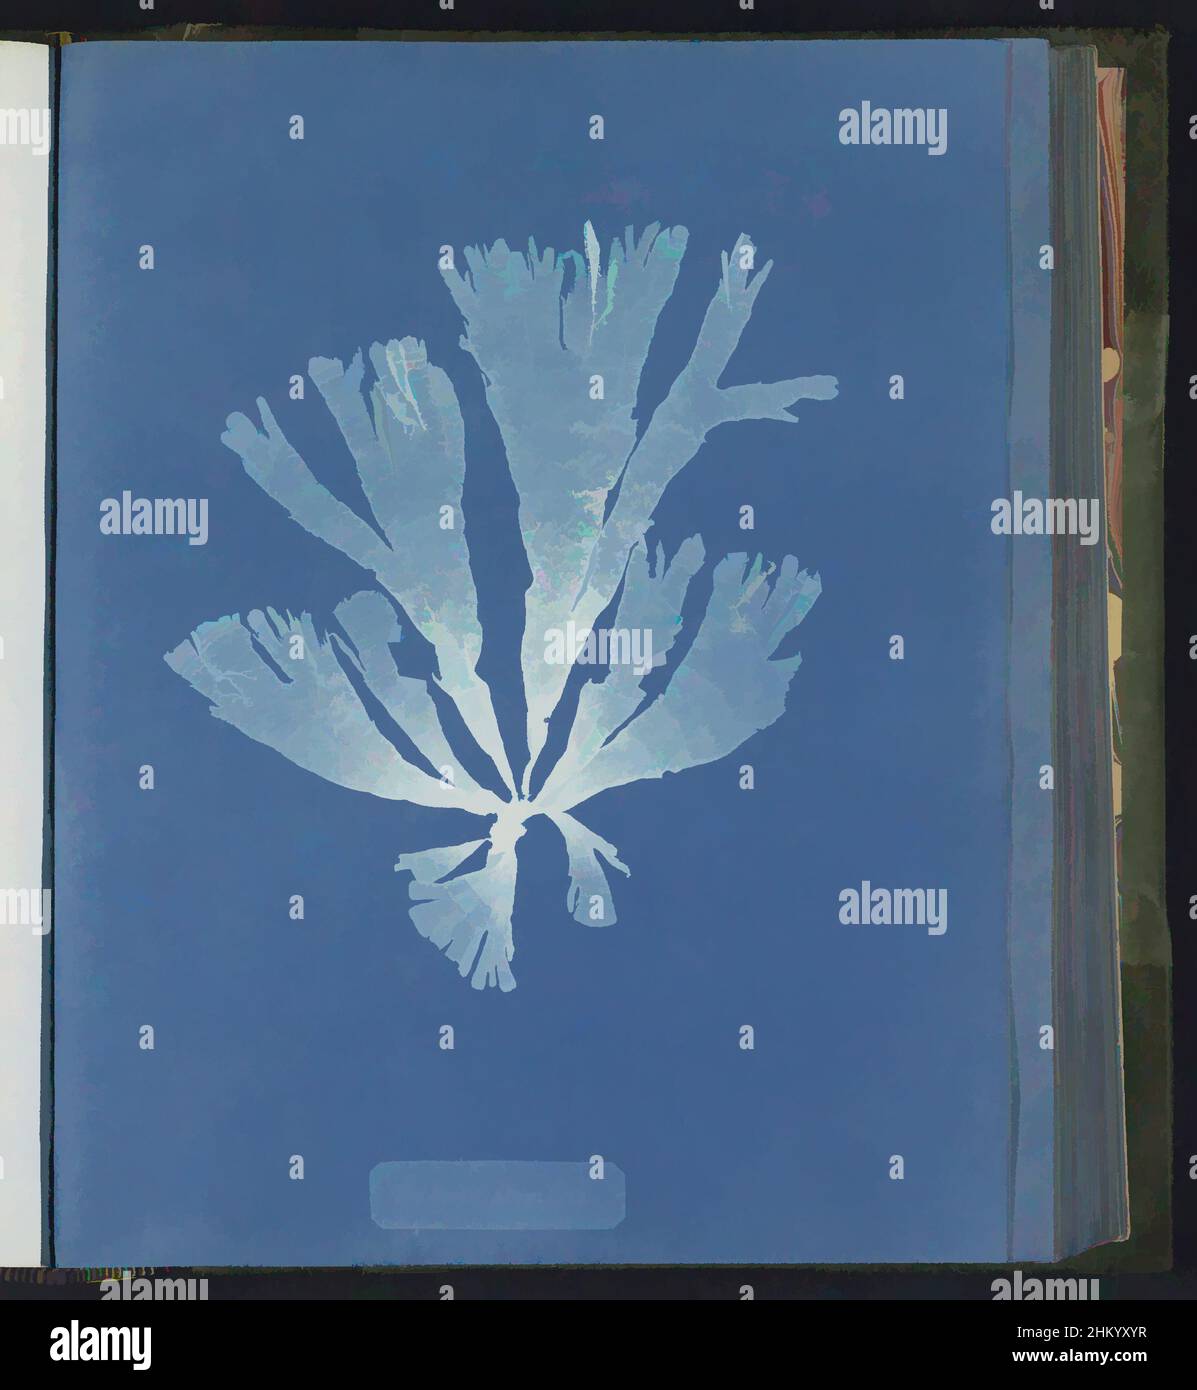 Art inspired by Dictyota atomaria, Anna Atkins, United Kingdom, c. 1843 - c. 1853, photographic support, cyanotype, height 250 mm × width 200 mm, Classic works modernized by Artotop with a splash of modernity. Shapes, color and value, eye-catching visual impact on art. Emotions through freedom of artworks in a contemporary way. A timeless message pursuing a wildly creative new direction. Artists turning to the digital medium and creating the Artotop NFT Stock Photo